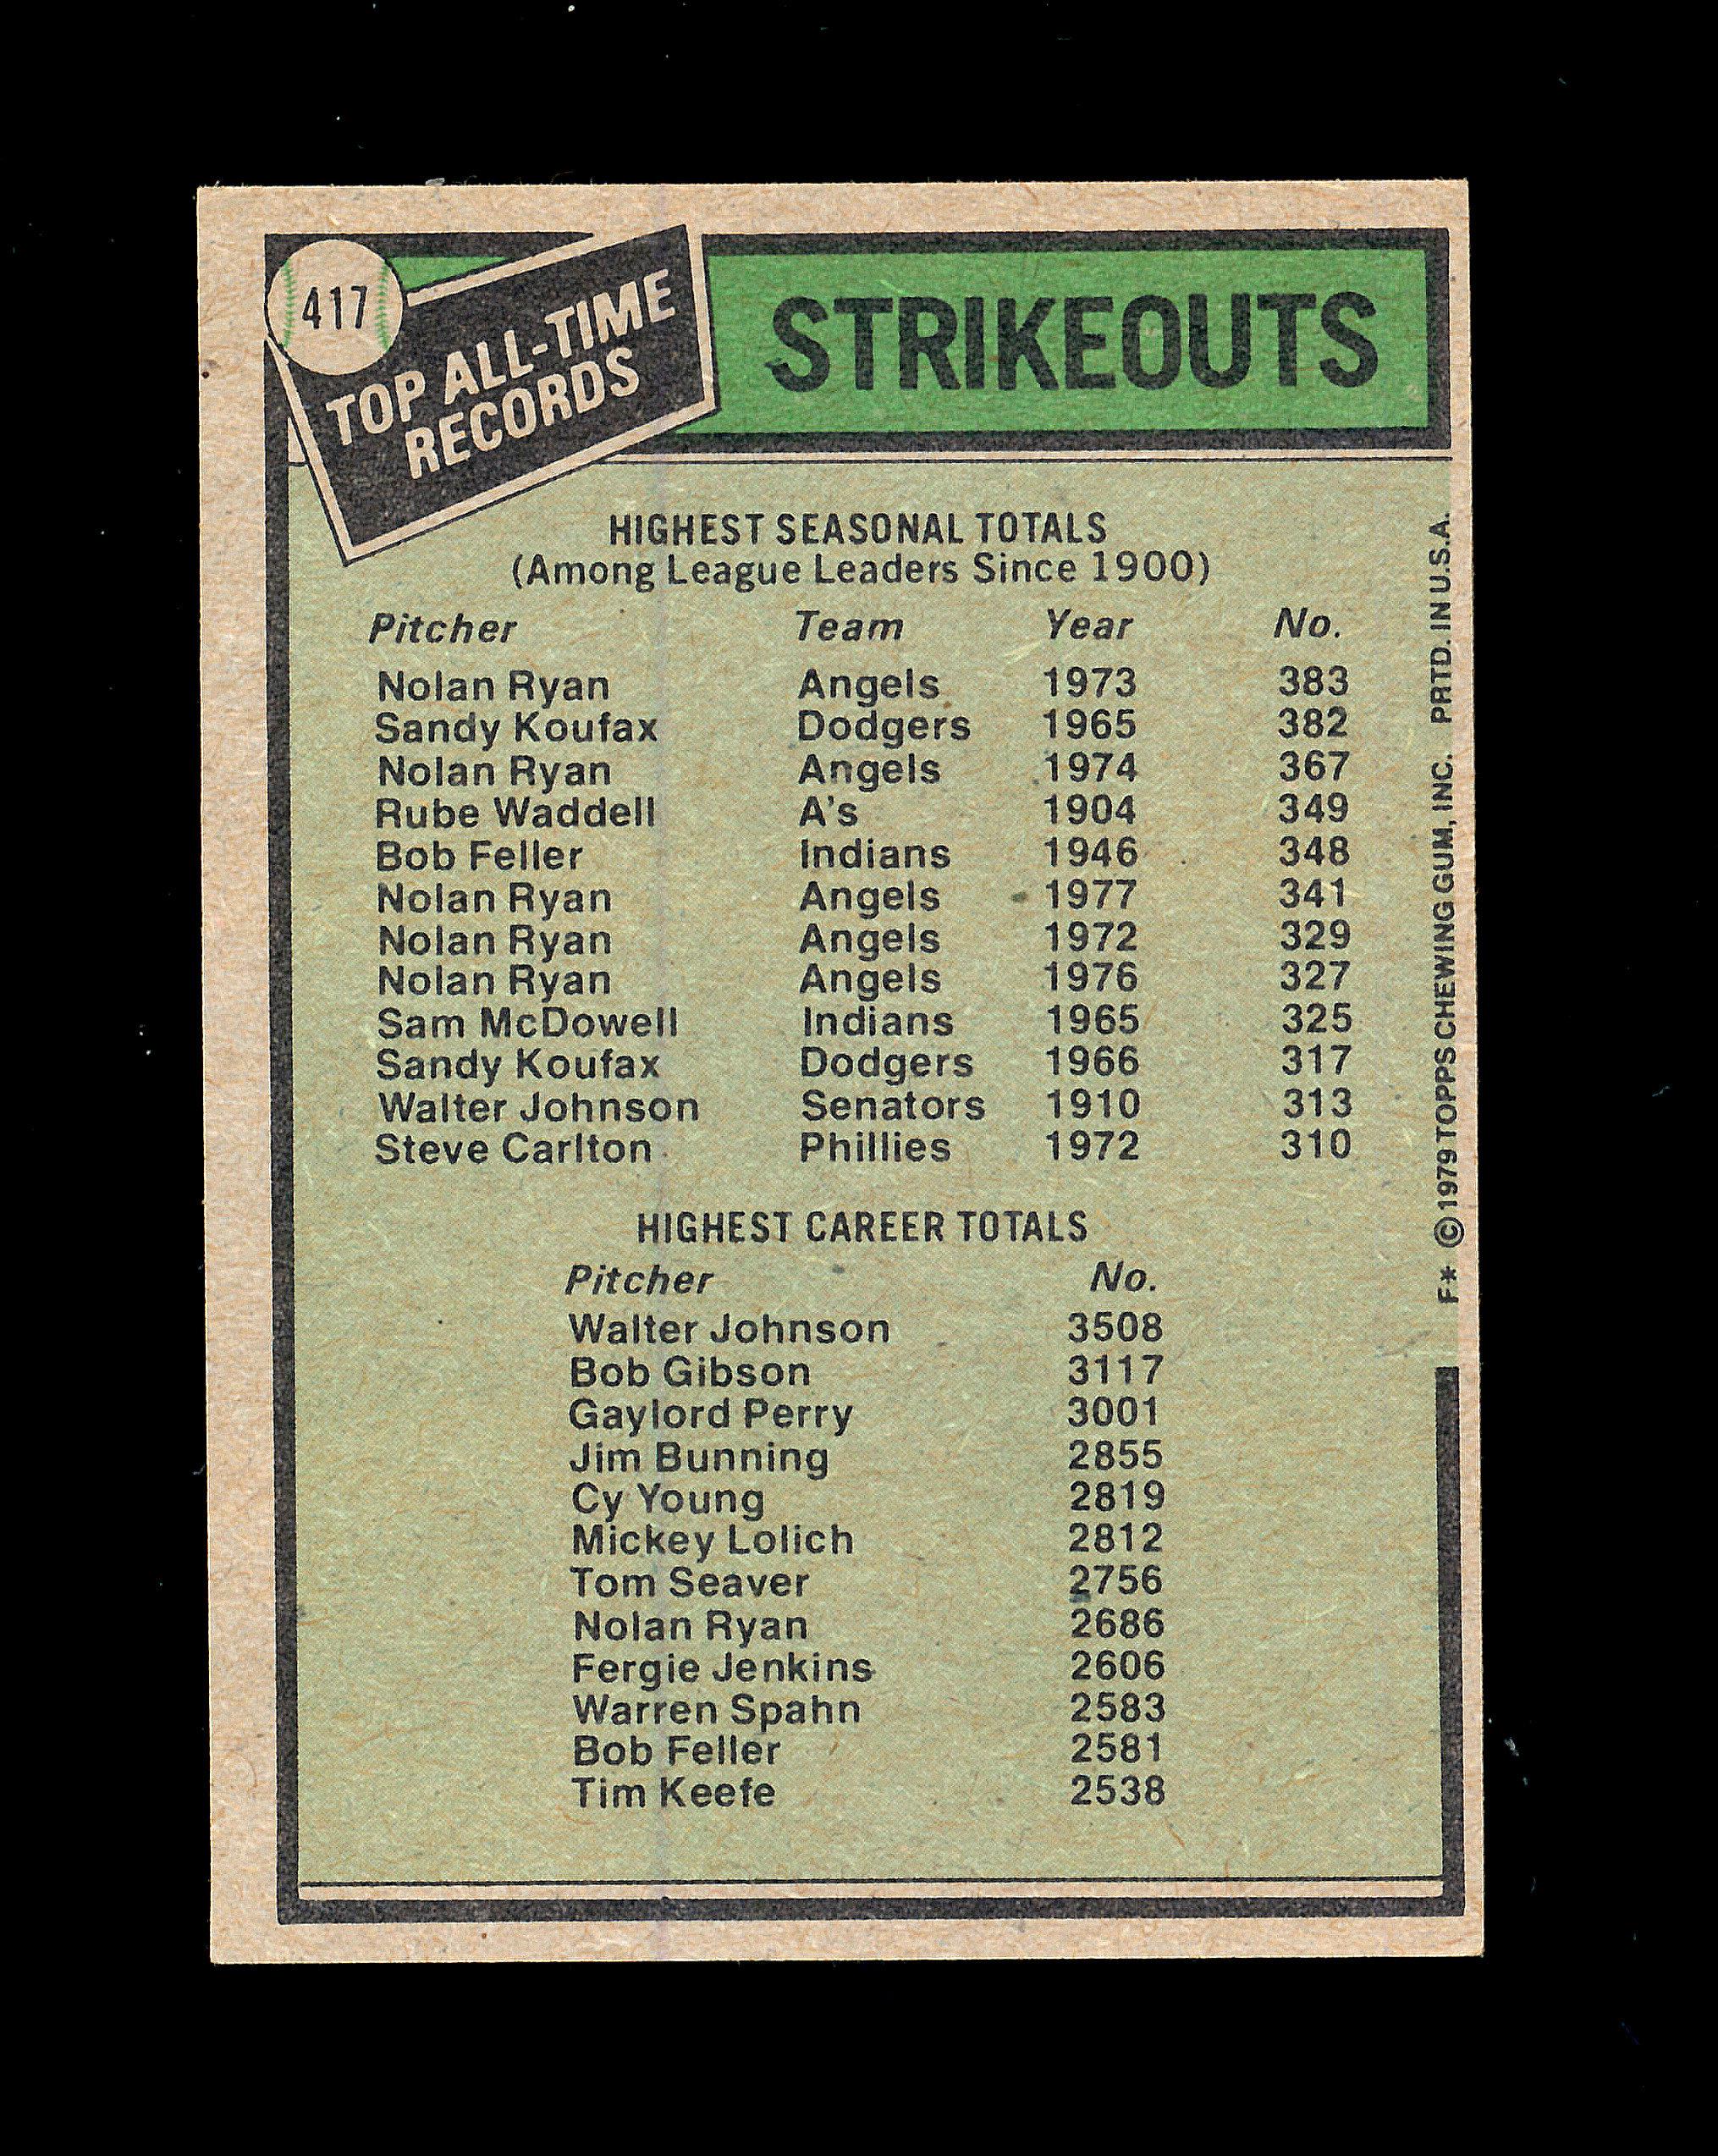 1979 Topps Baseball Card #417 All-Time Strikeout Leaders Nolan Ryan and Wal